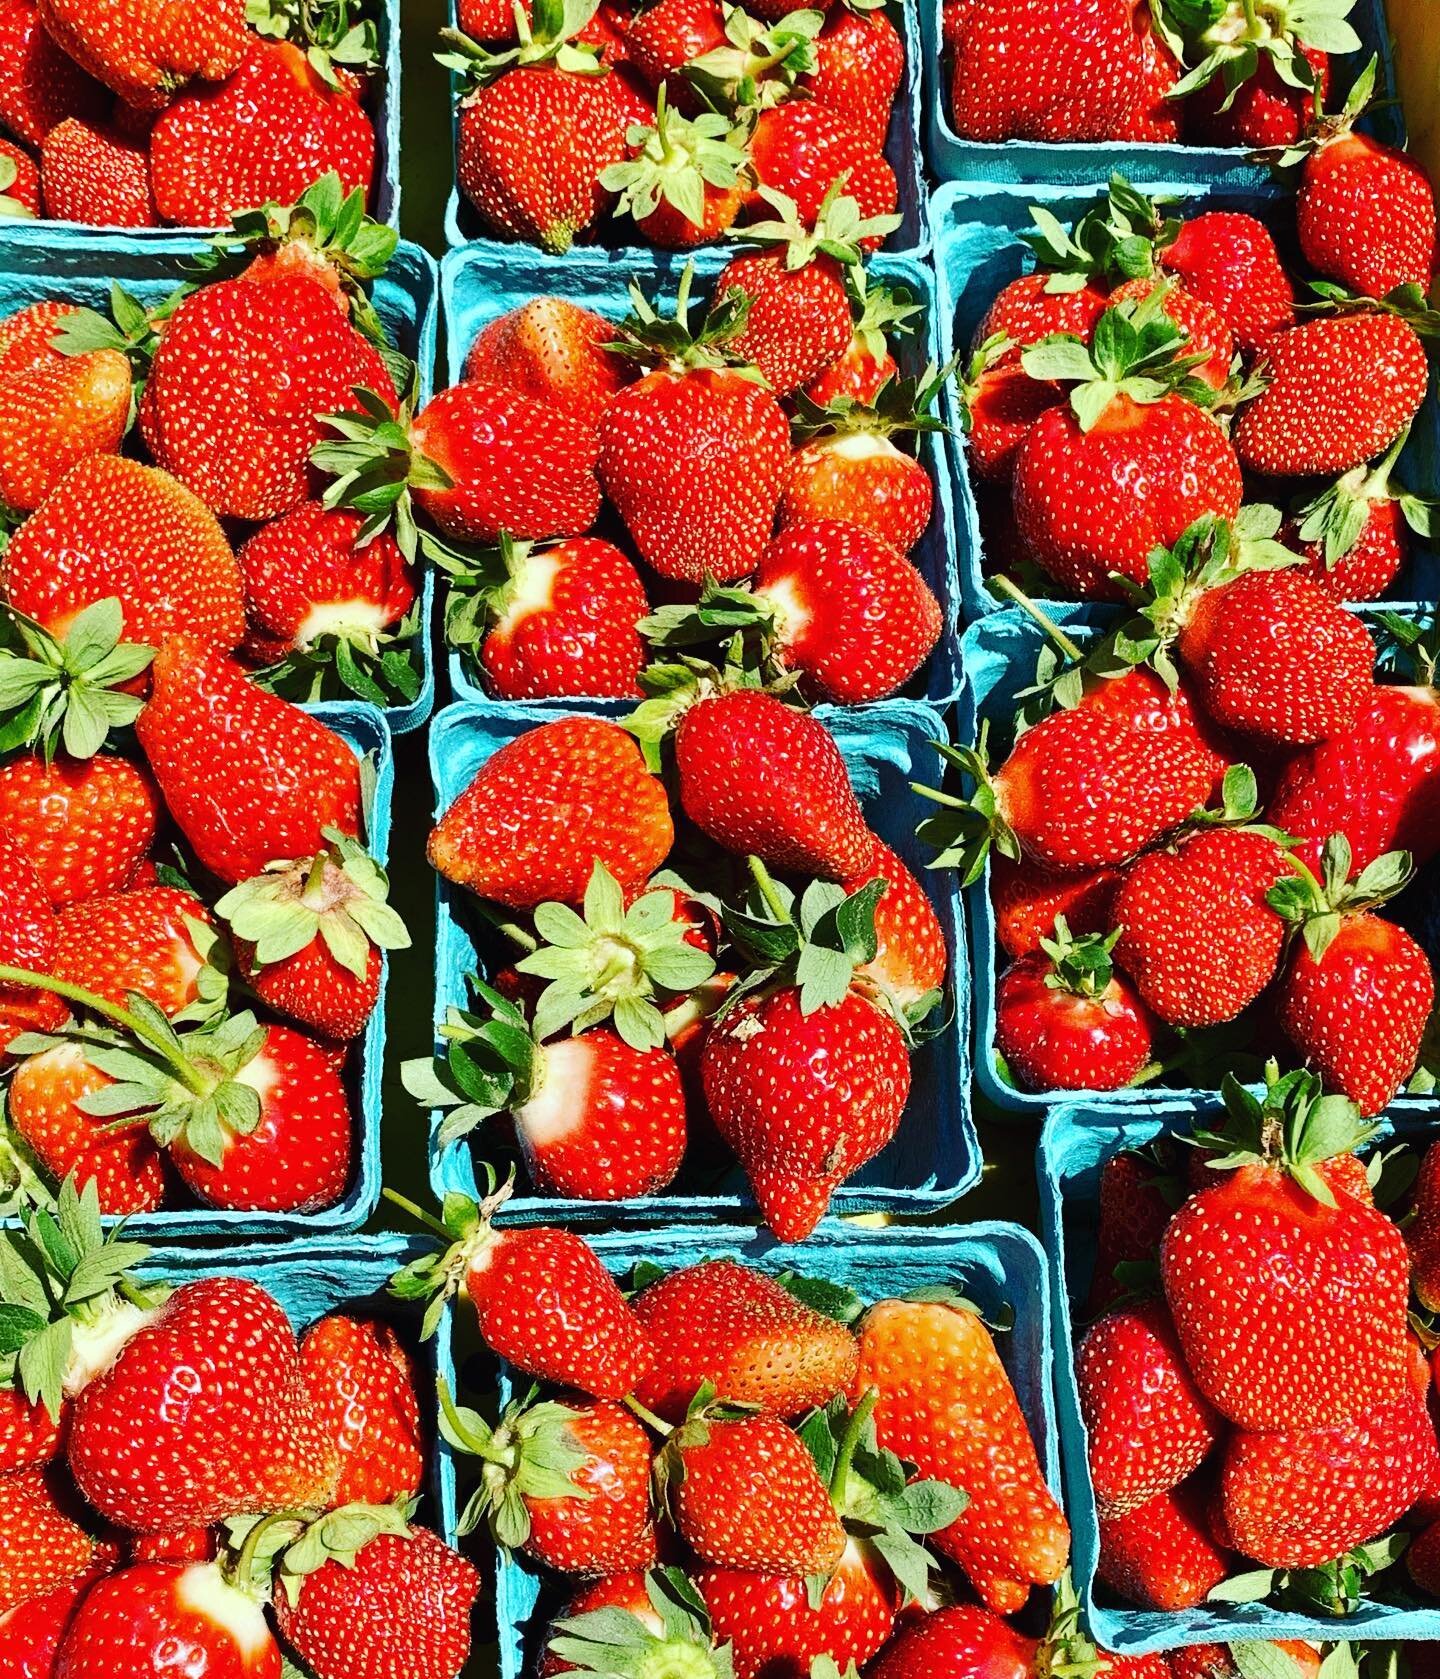 We grew strawberries for our summer CSA and they are sooo gooood! Have you gotten to try them yet? 

#summervibes #certifiedorganic #strawberries #csa #vermontfarmers